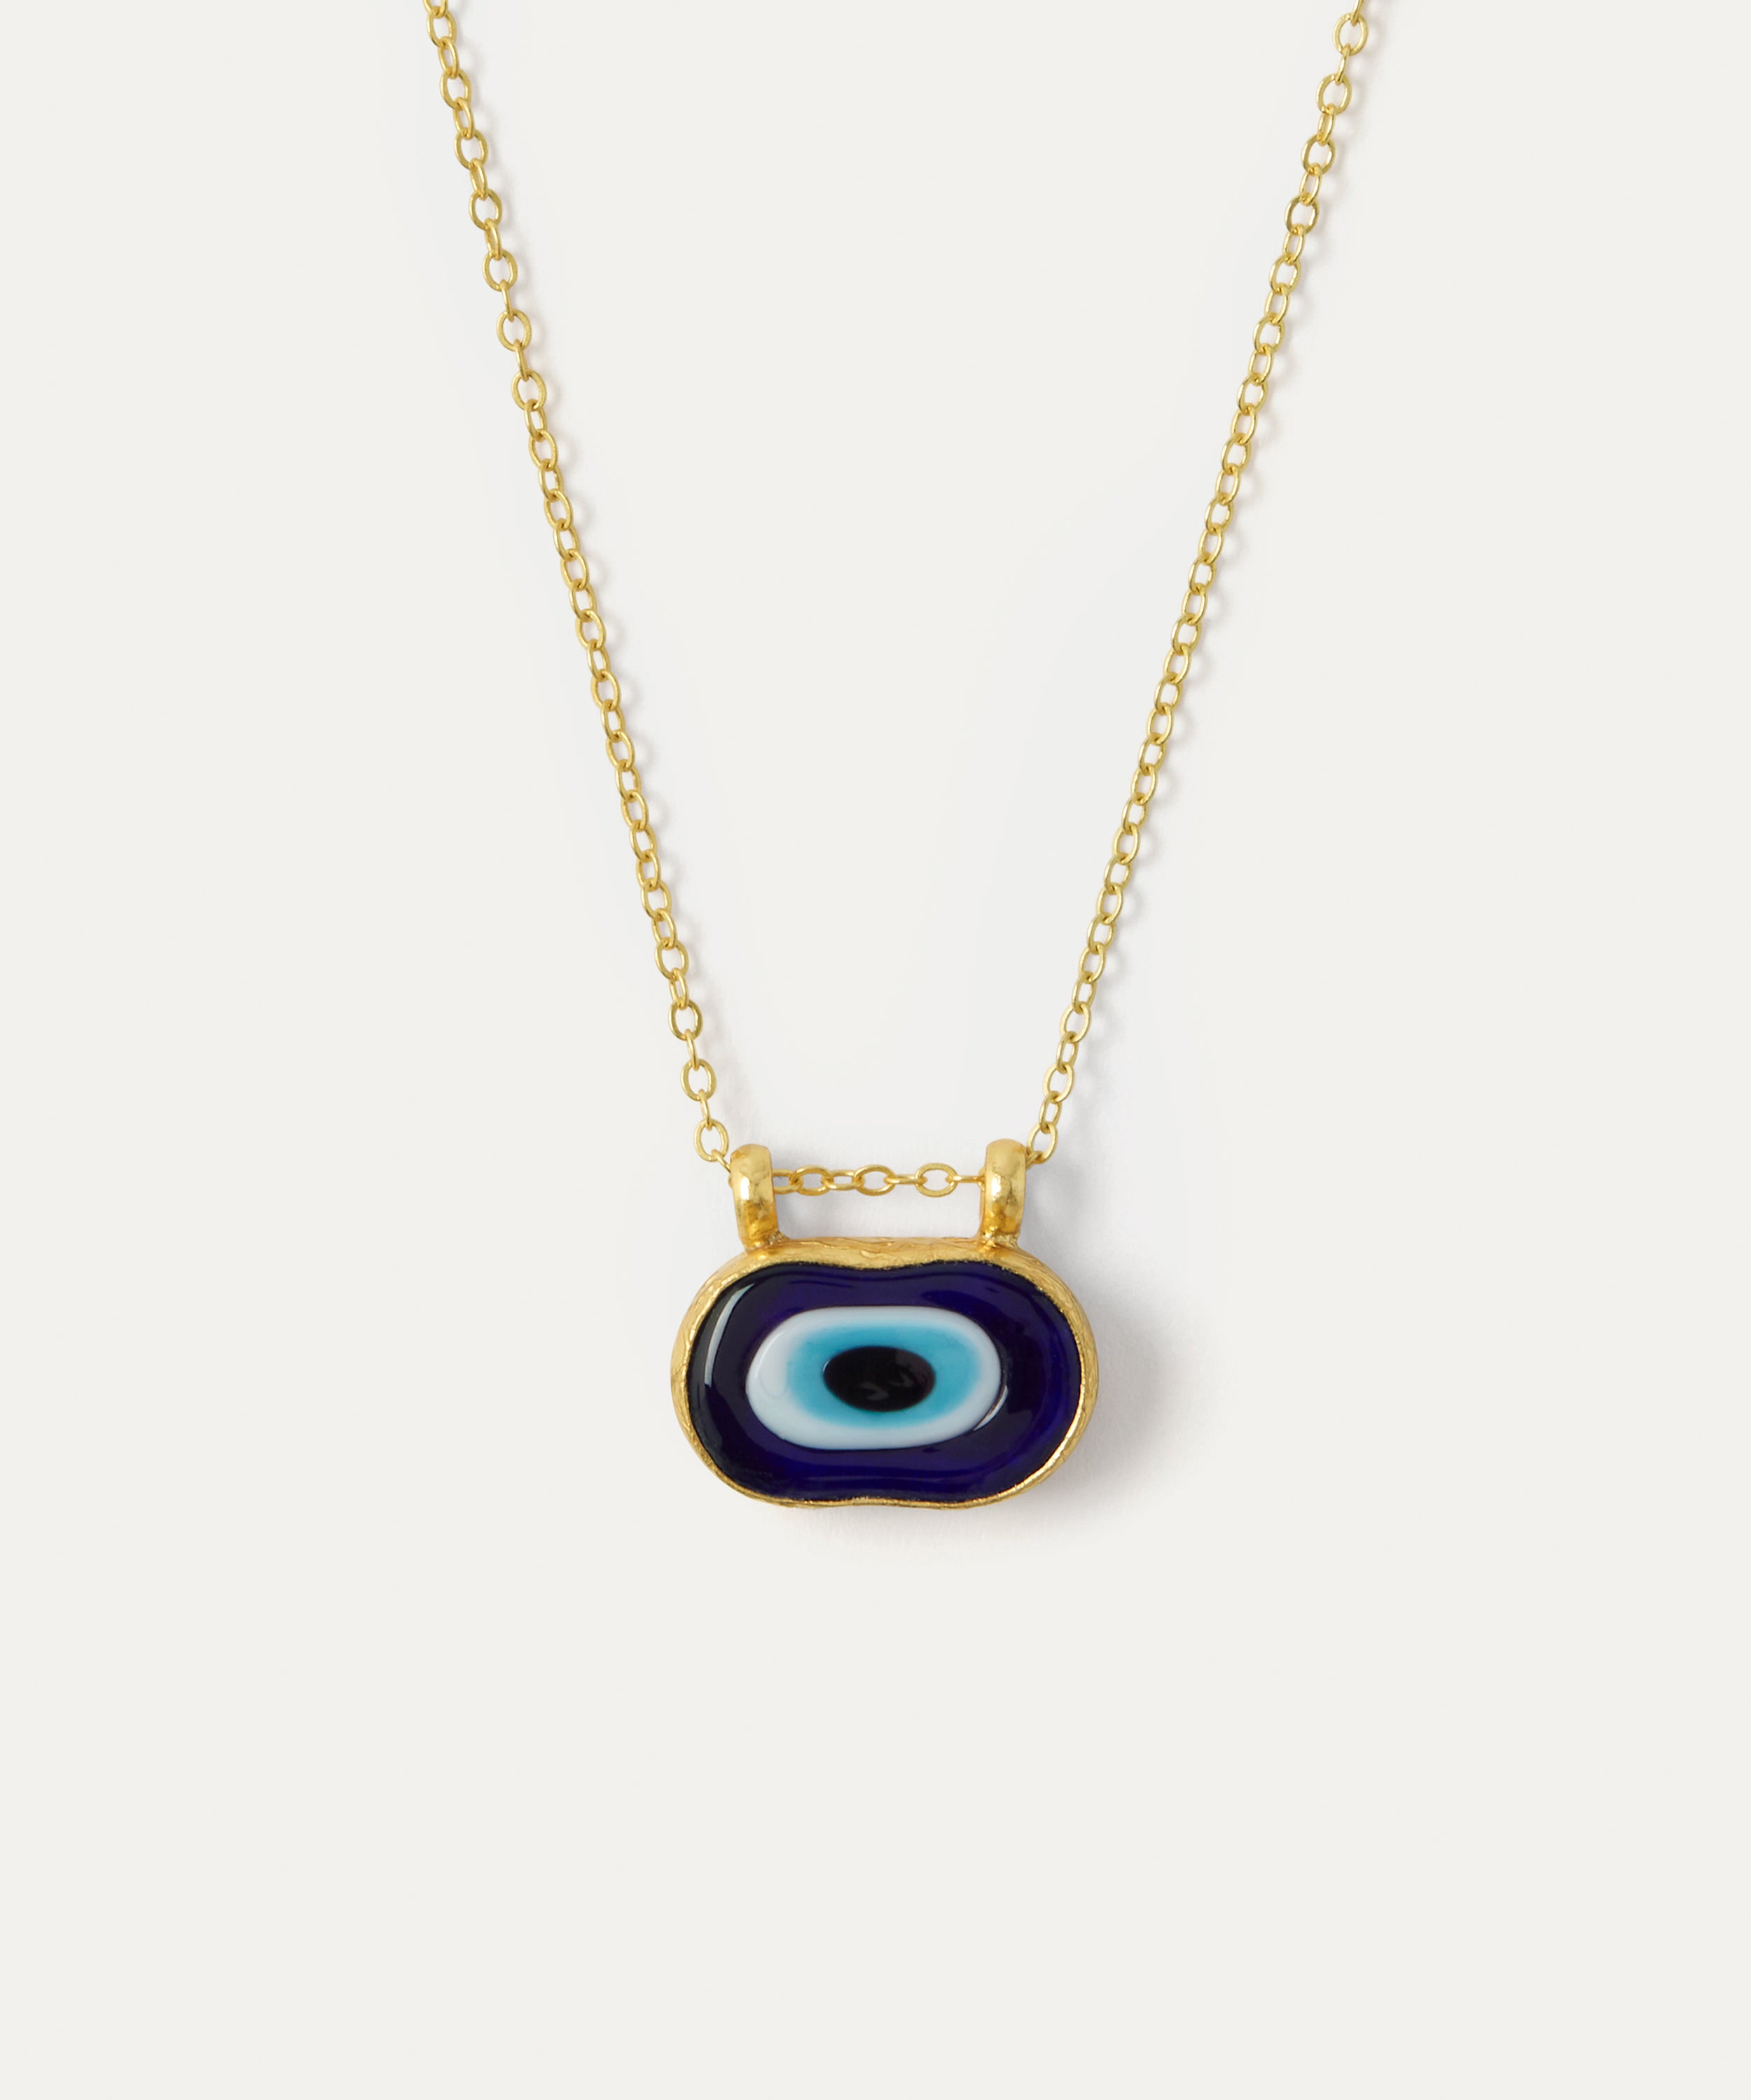 Amelia Evil Eye Pendant Necklace | Sustainable Jewellery by Ottoman Hands